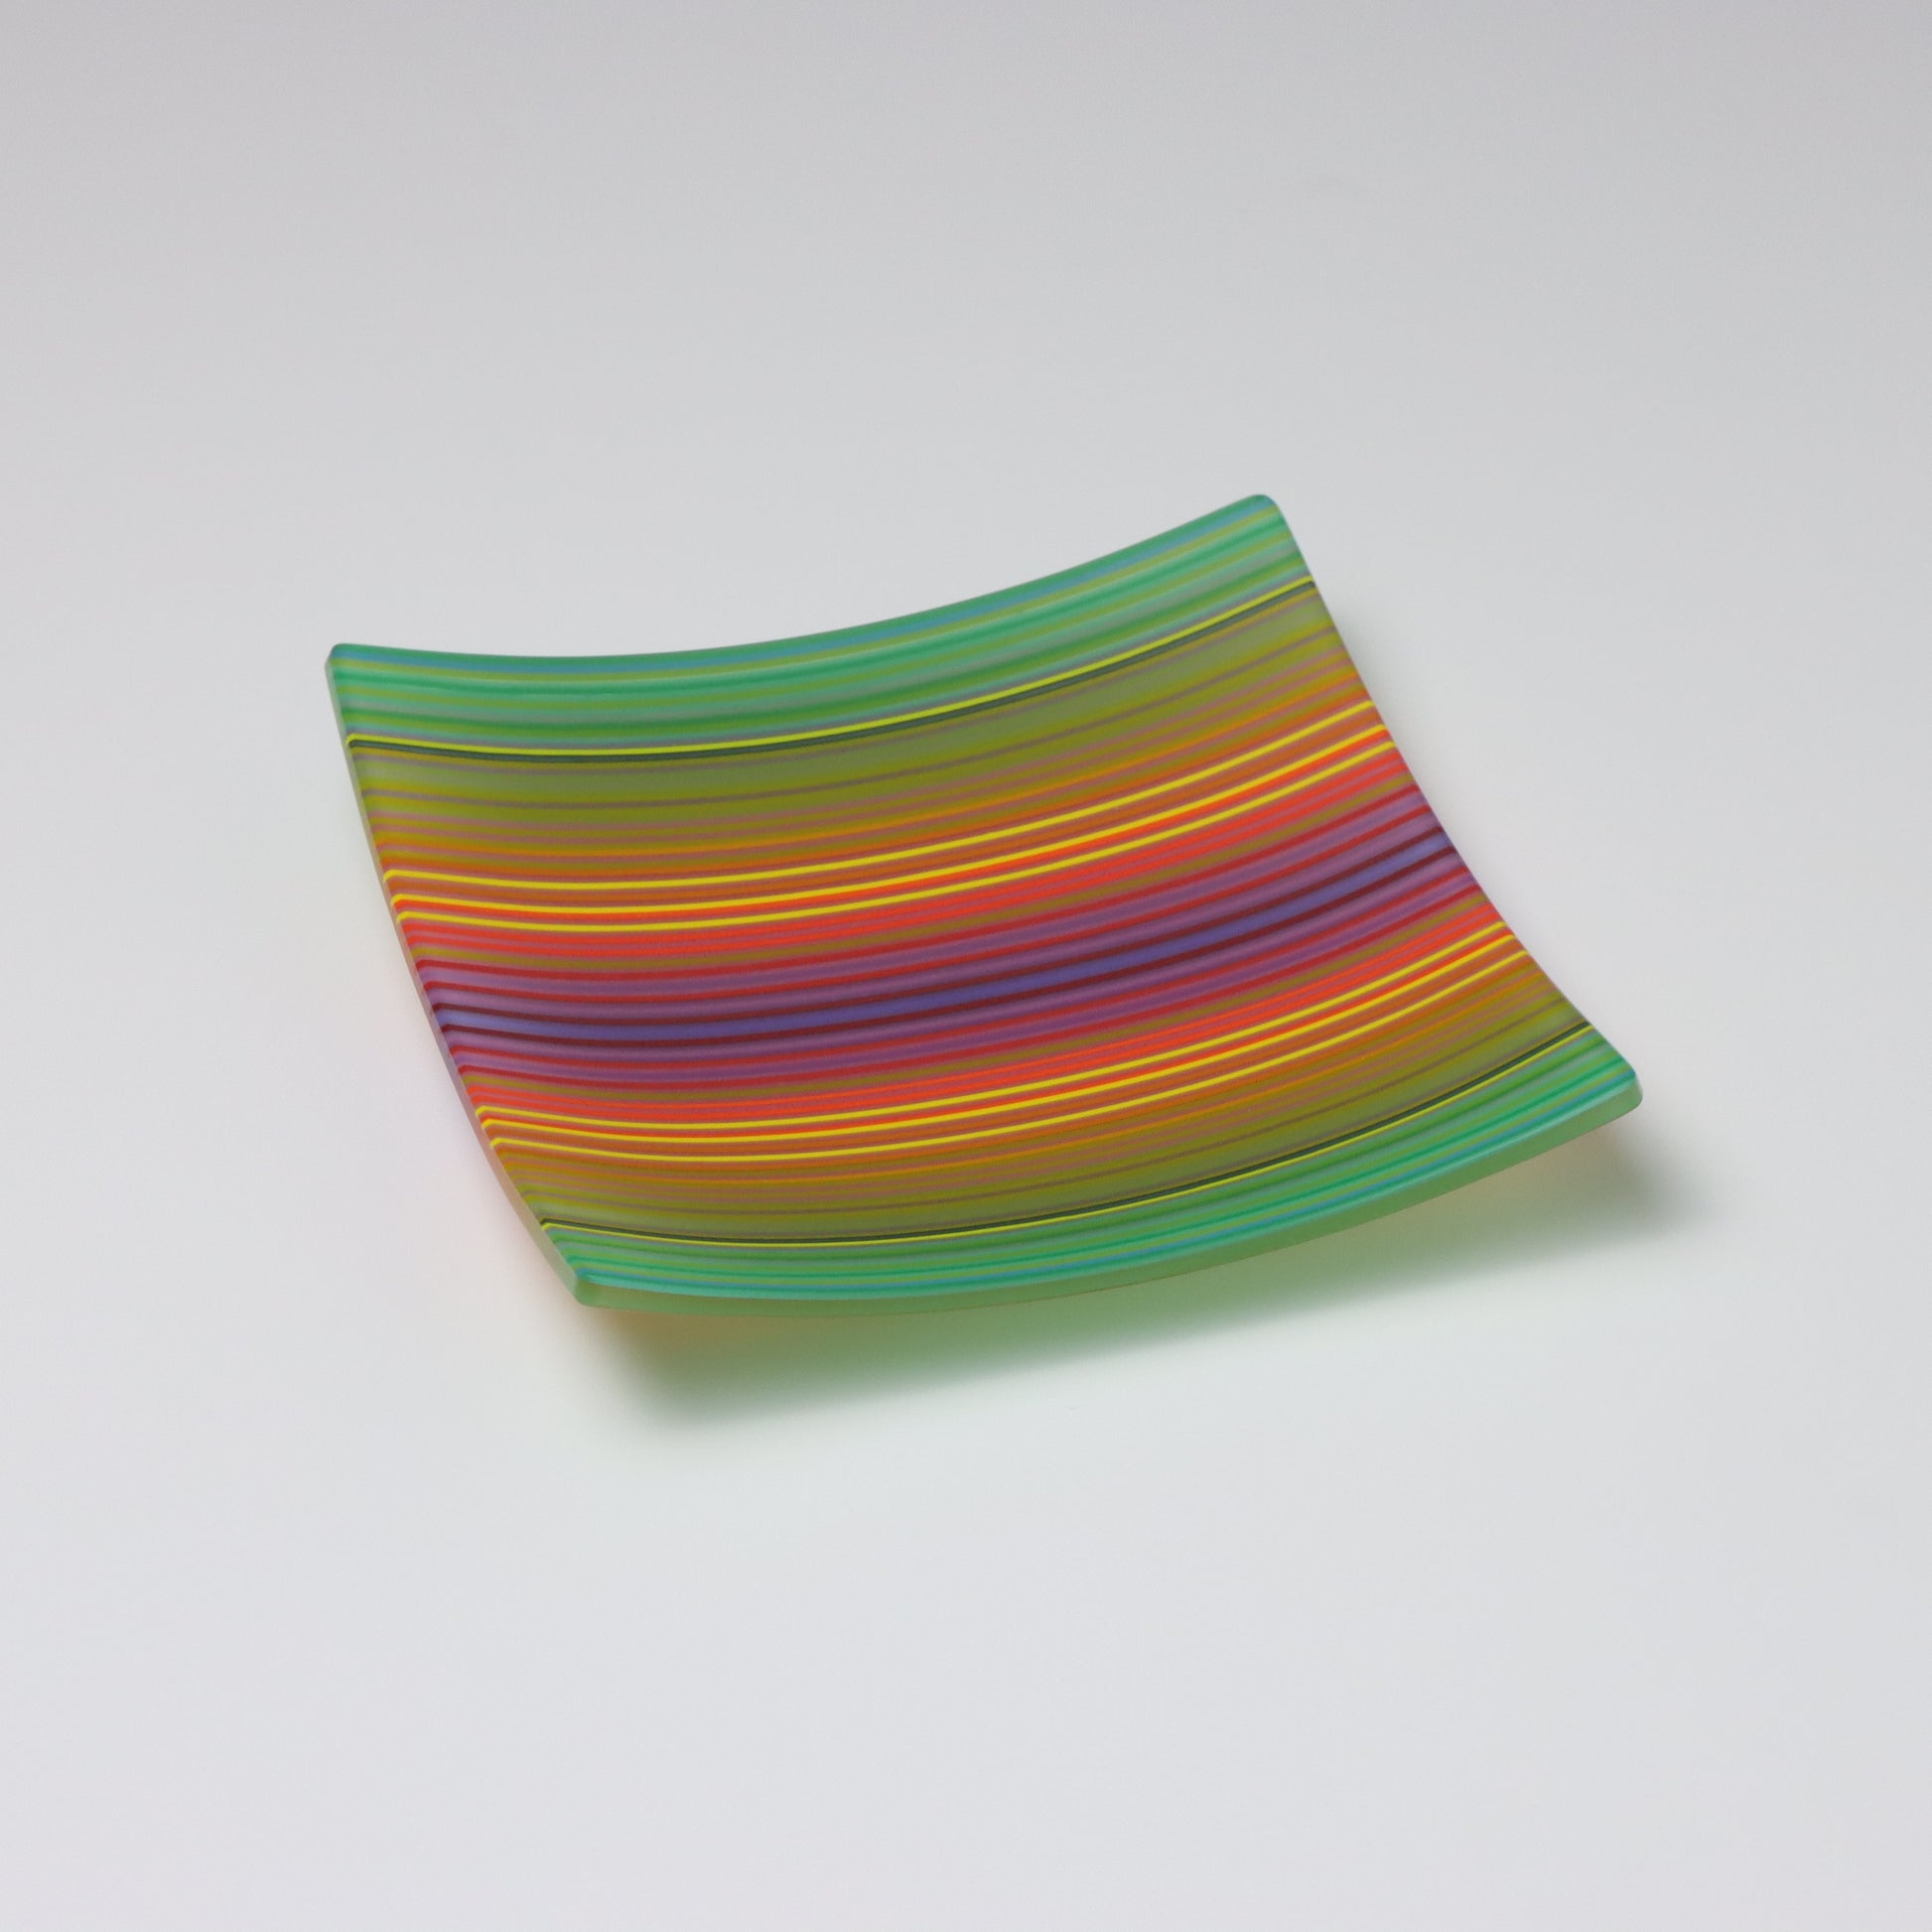 A decorative square shallow glass plate with raised corners and a  colourful ColourWave stripe patterns showing key colours of green, yellow, red and blue